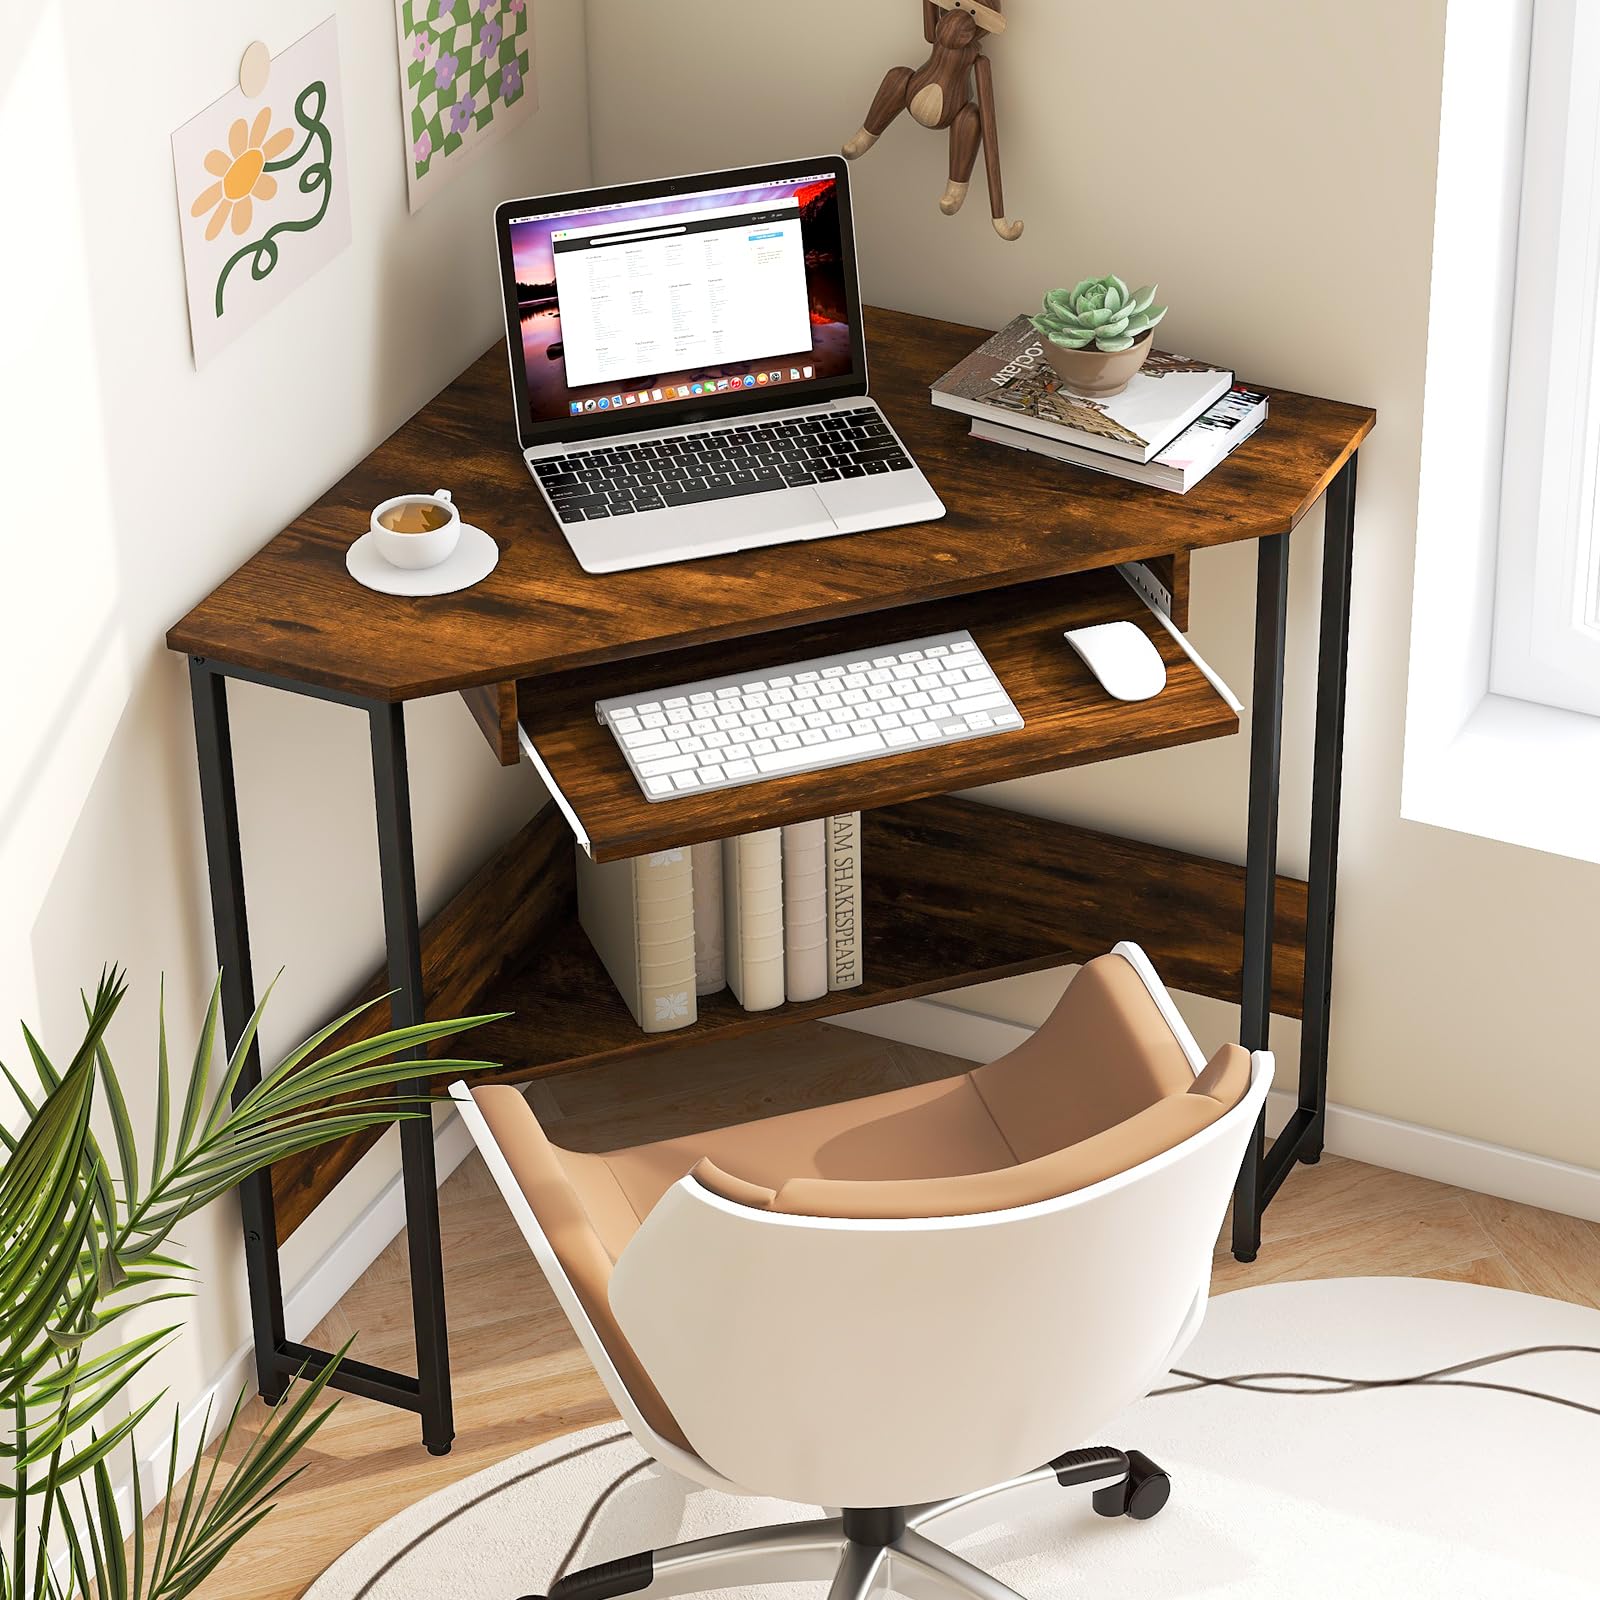 IFANNY Corner Computer Desk with Keyboard Tray, Wooden Triangle Desk w/Power Outlet & Storage Shelves, Rustic Corner Writing Desk, Small Corner Desks for Small Spaces